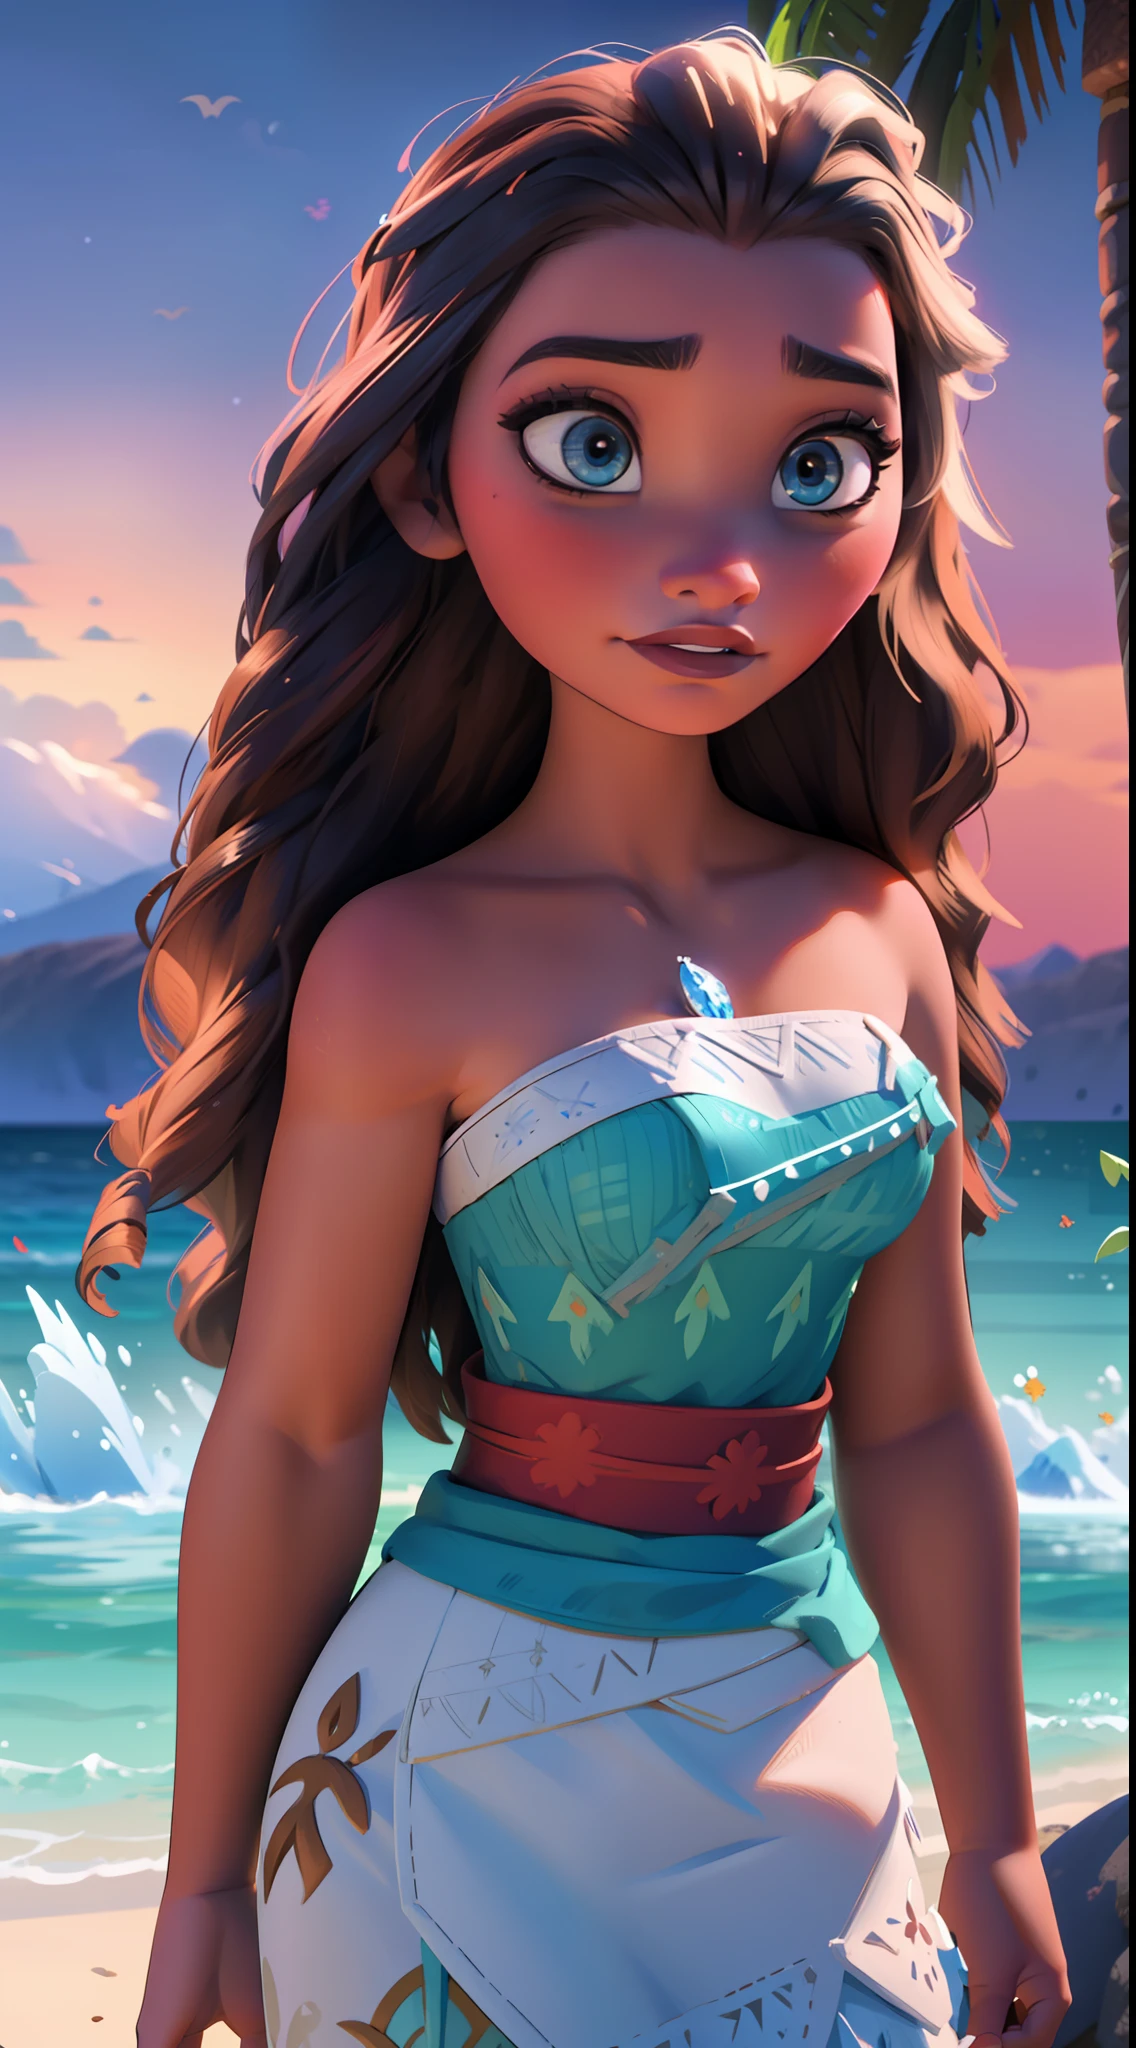 Elsa-Moana Fusion, Merging models, Moana&#39;s clothes, melting, 1girl, Beautiful, Character, Woman, Female, beachfront, (master part:1.2), (best qualityer:1.2), (独奏:1.2), ((struggling pose)), ((field of battle)), cinemactic, perfects eyes, perfect  skin, perfect lighting, sorrido, Lumiere, Farbe, texturized skin, detail, Beauthfull, wonder wonder wonder wonder wonder wonder wonder wonder wonder wonder wonder wonder wonder wonder wonder wonder wonder wonder wonder wonder wonder wonder wonder wonder wonder wonder wonder wonder wonder wonder wonder wonder, ultra detali, face perfect